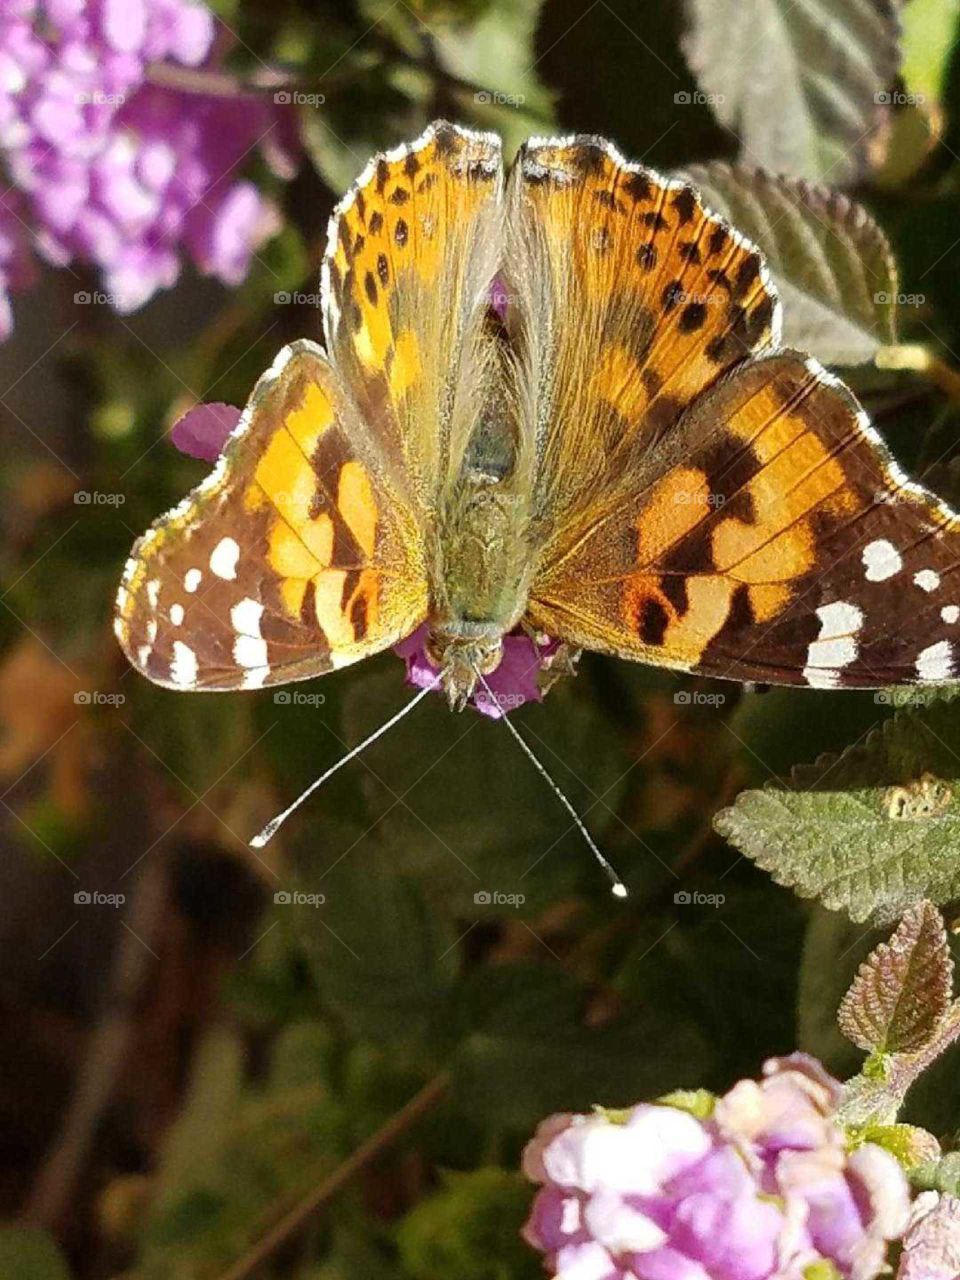 Butterfly, Nature, Flower, Insect, Garden